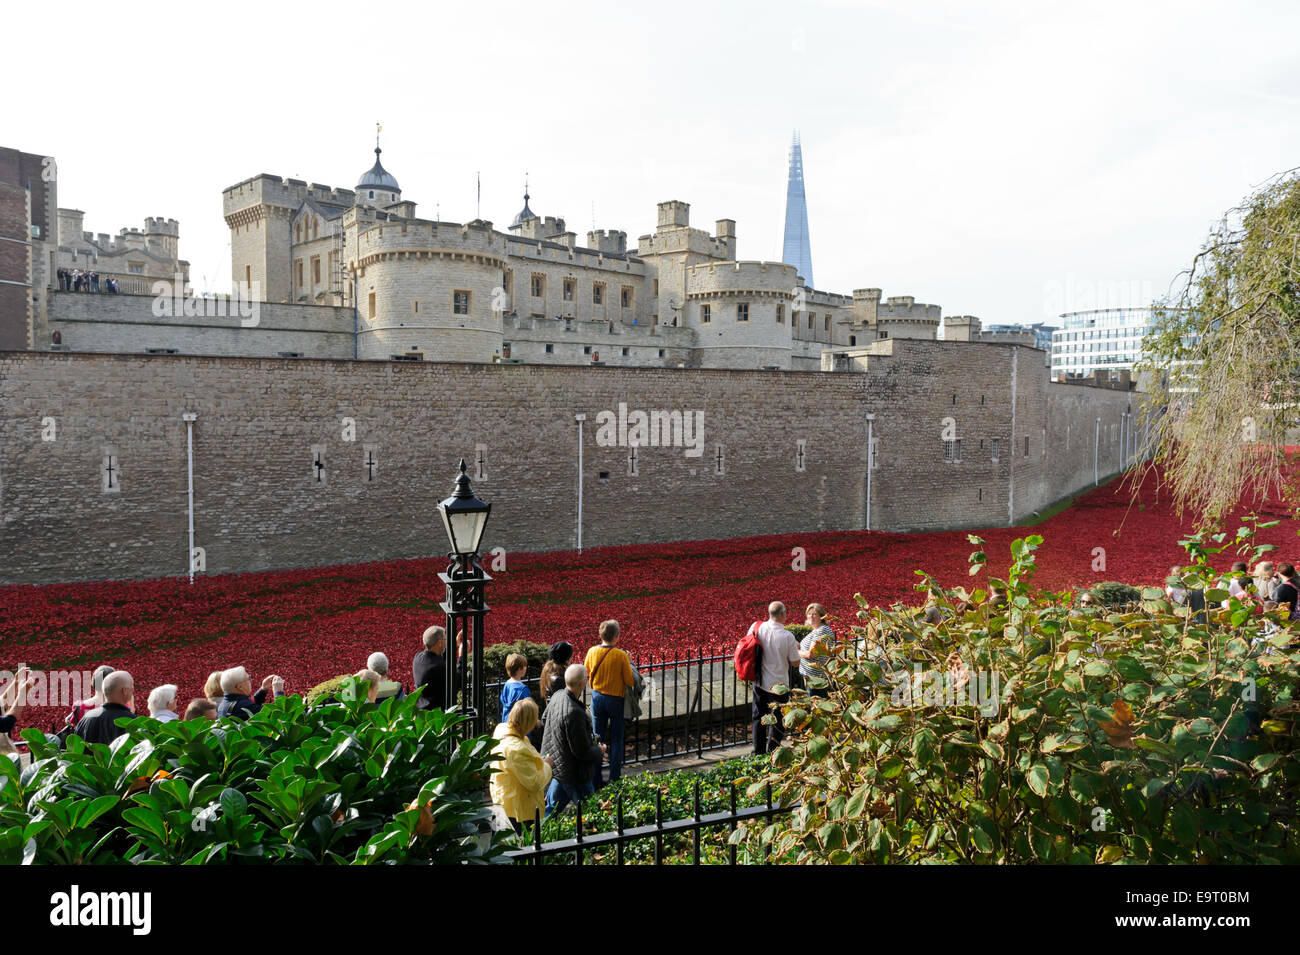 Visitors admiring the display of poppies outside the wall of Tower of London, England, United Kingdom. Stock Photo